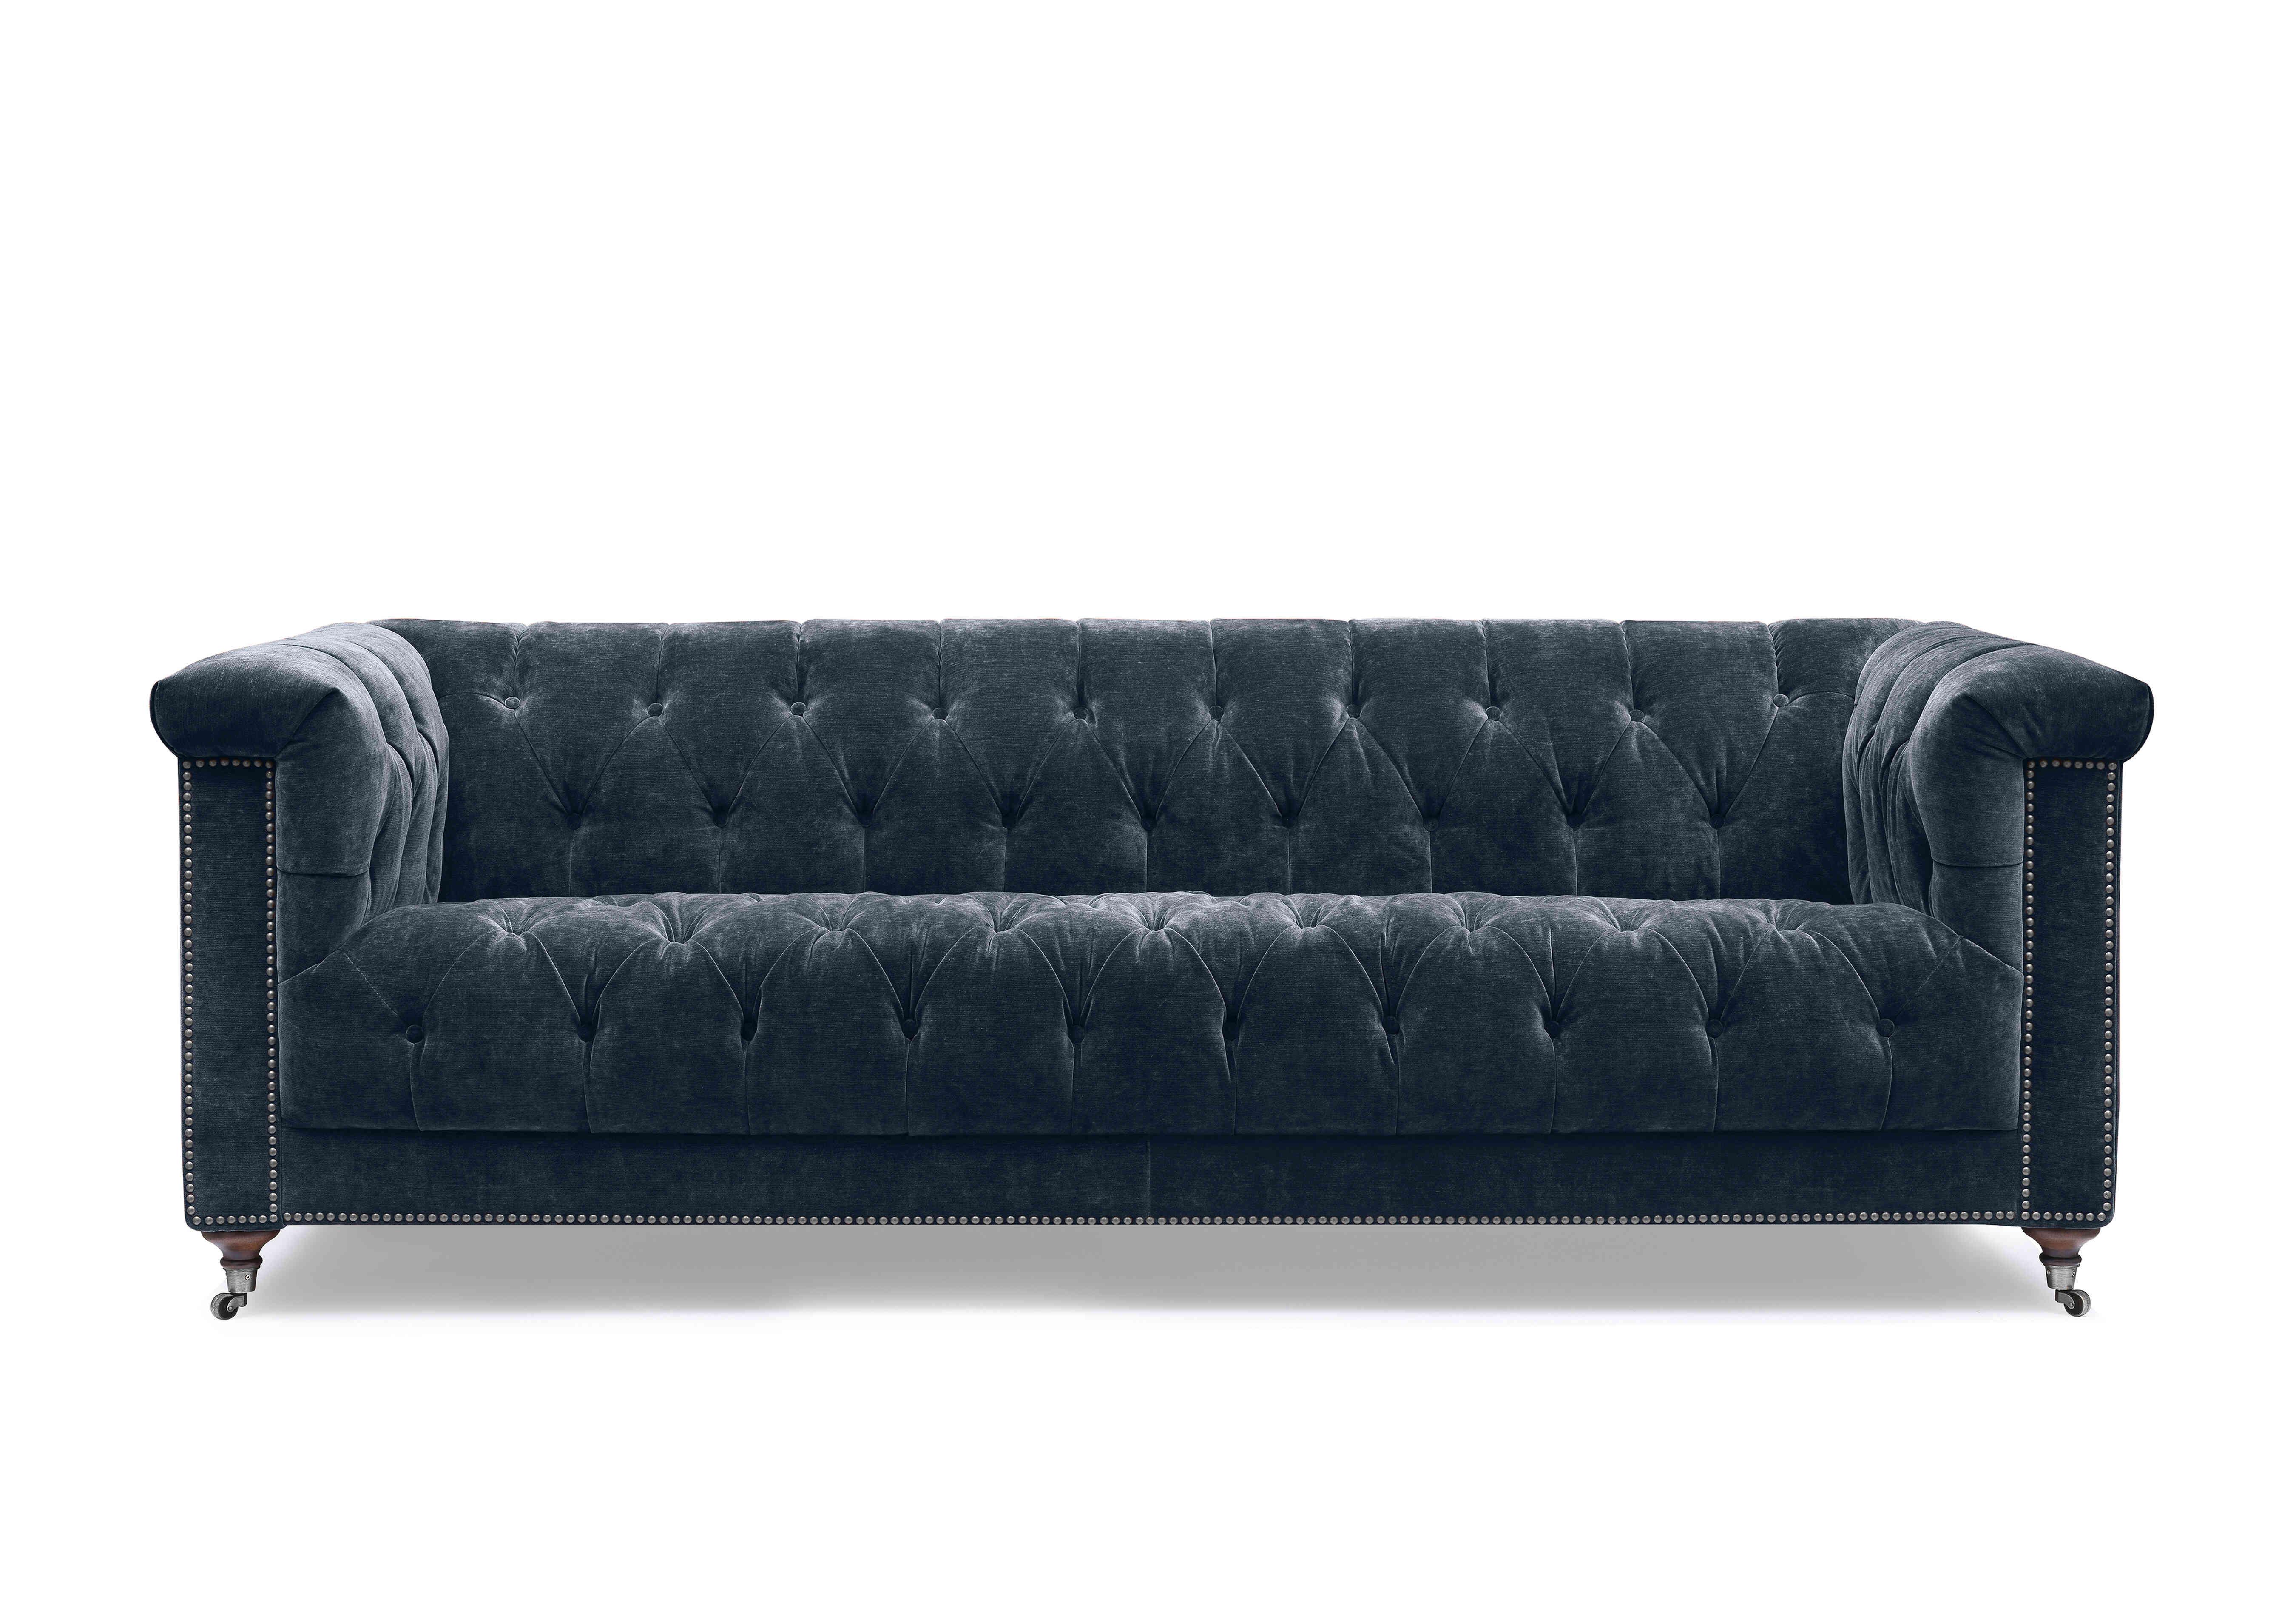 Wallace 4 Seater Fabric Chesterfield Sofa in X3y2-W024 Midnight on Furniture Village